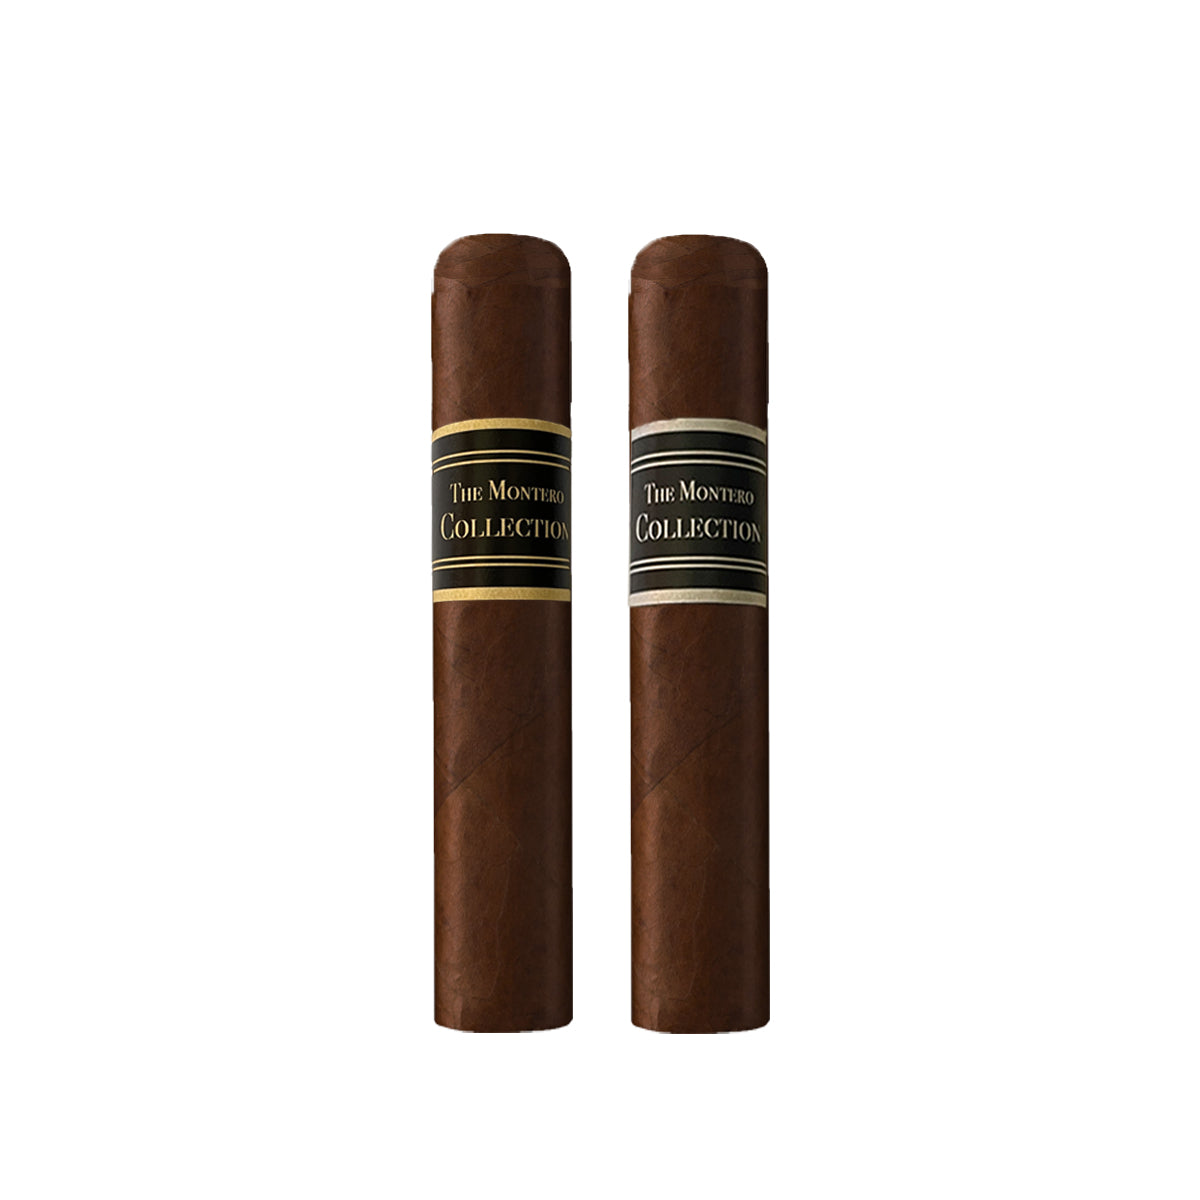 28 Cigars The Majesty Humidor - Montero Collection 2021